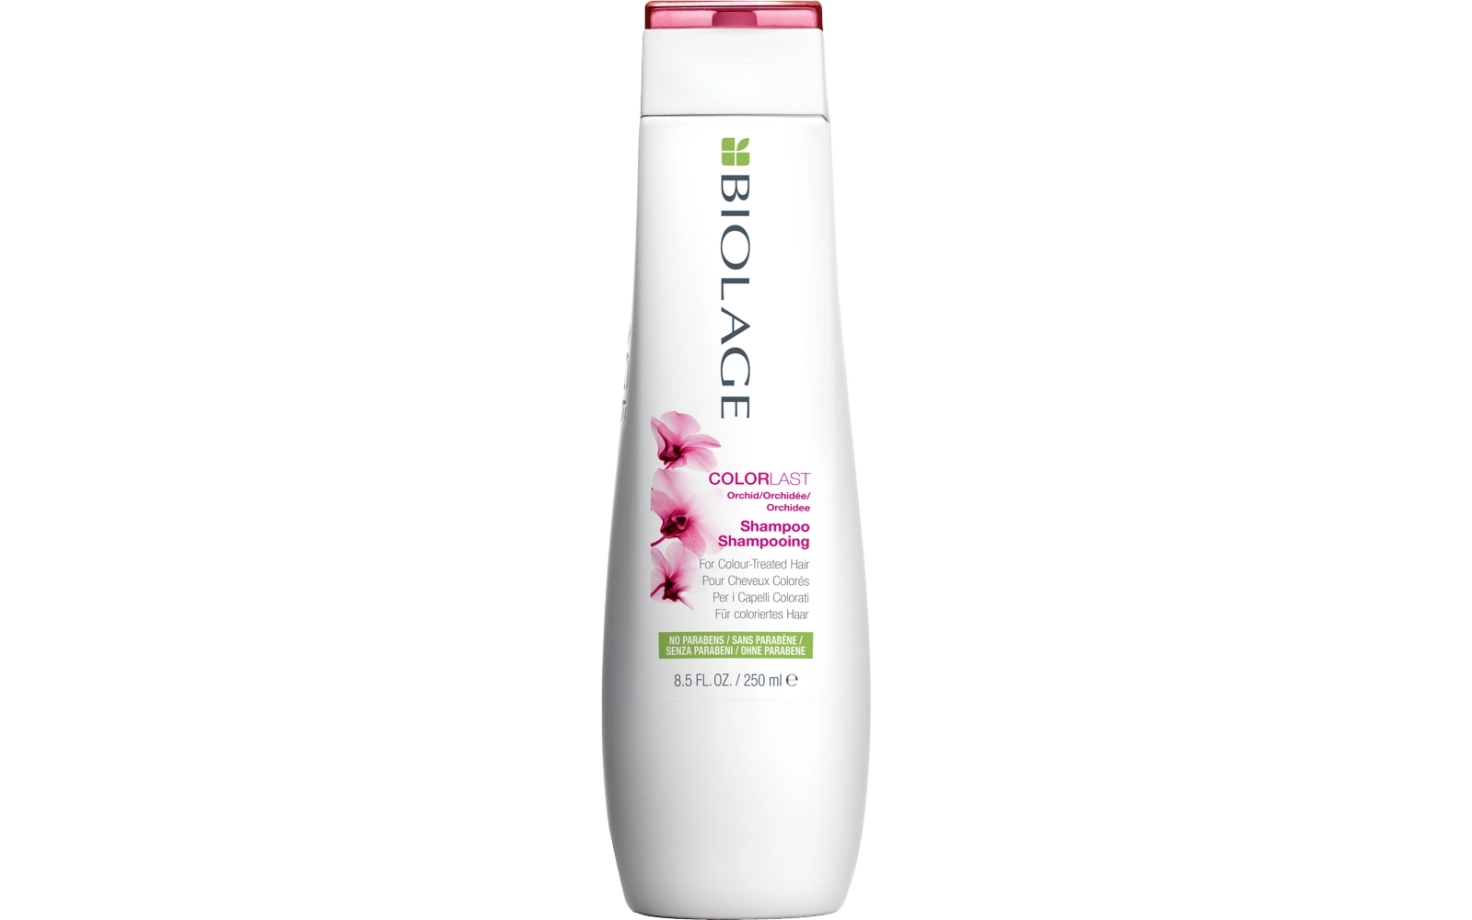 7. "Biolage Colorlast Shampoo for Color-Treated Hair" - wide 8